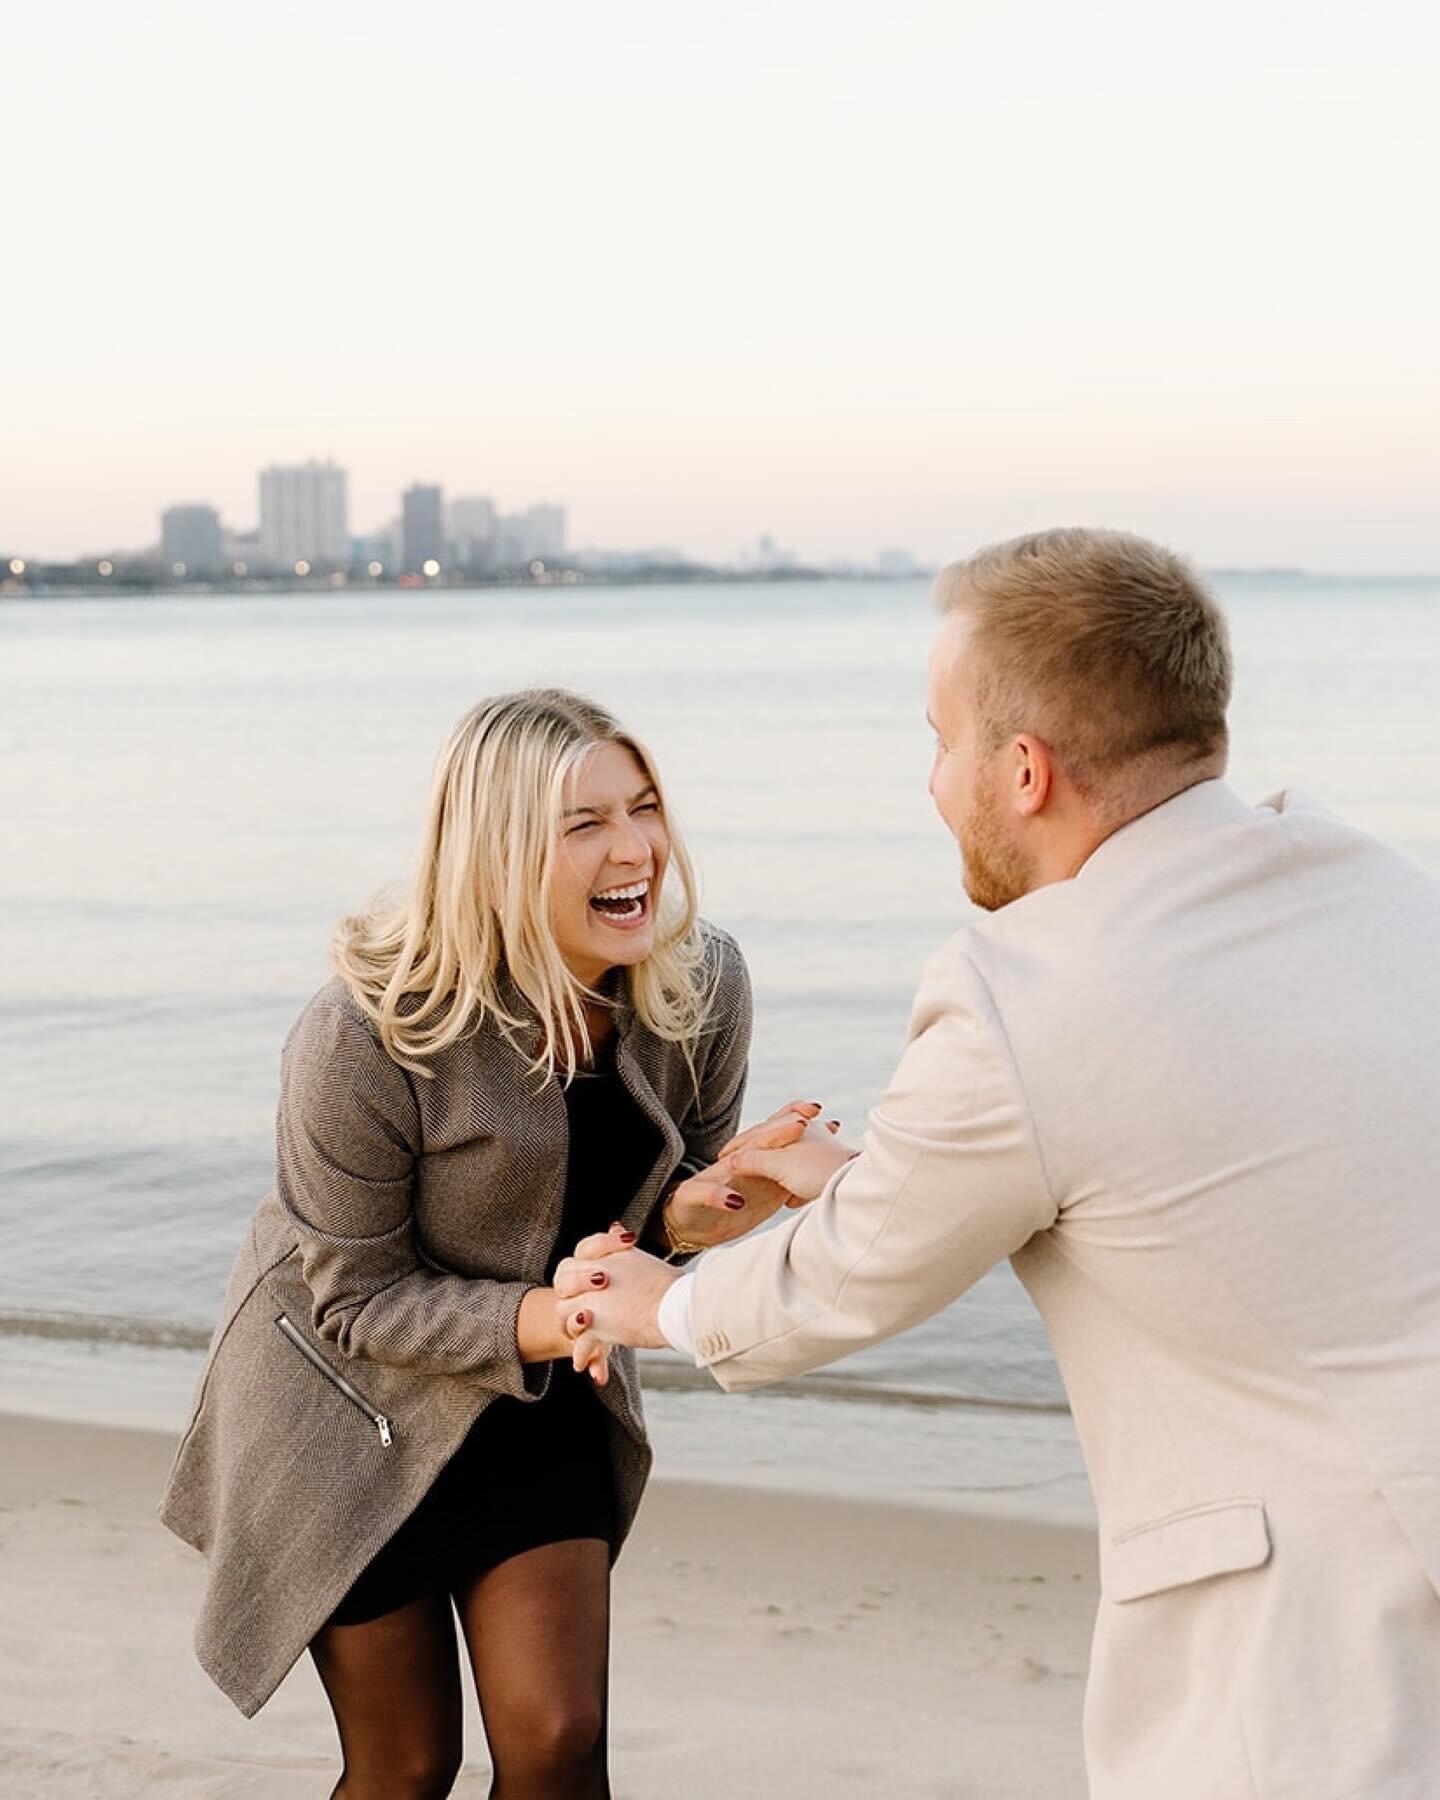 Winter beachside engagement session with Ryan &amp; Andrea 💜 North Avenue Beach, I fall in love with you more deeply every time we spend time together.